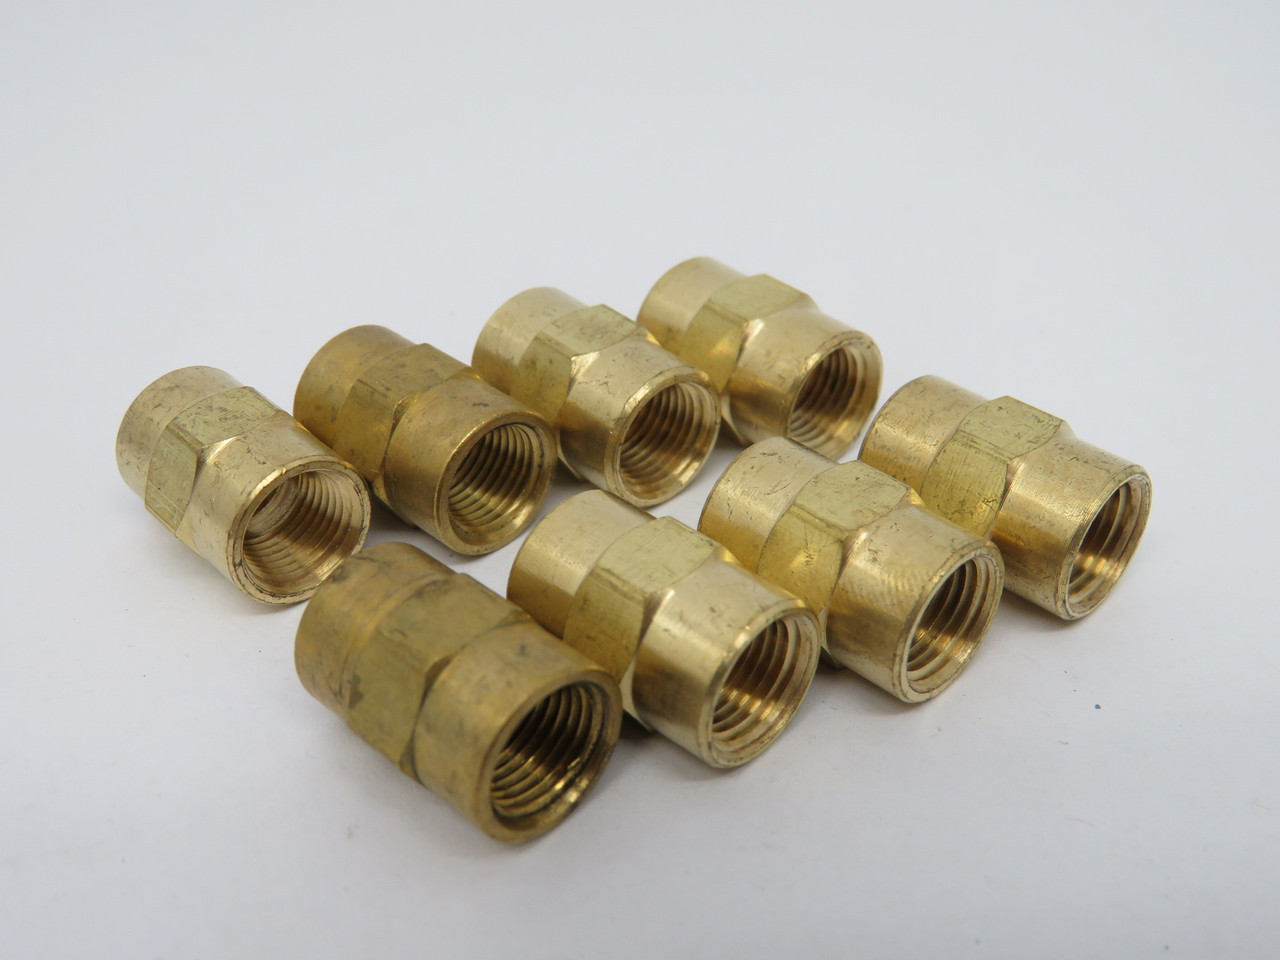 Generic Brass Female Coupling 1/8" NPT Lot of 8 USED